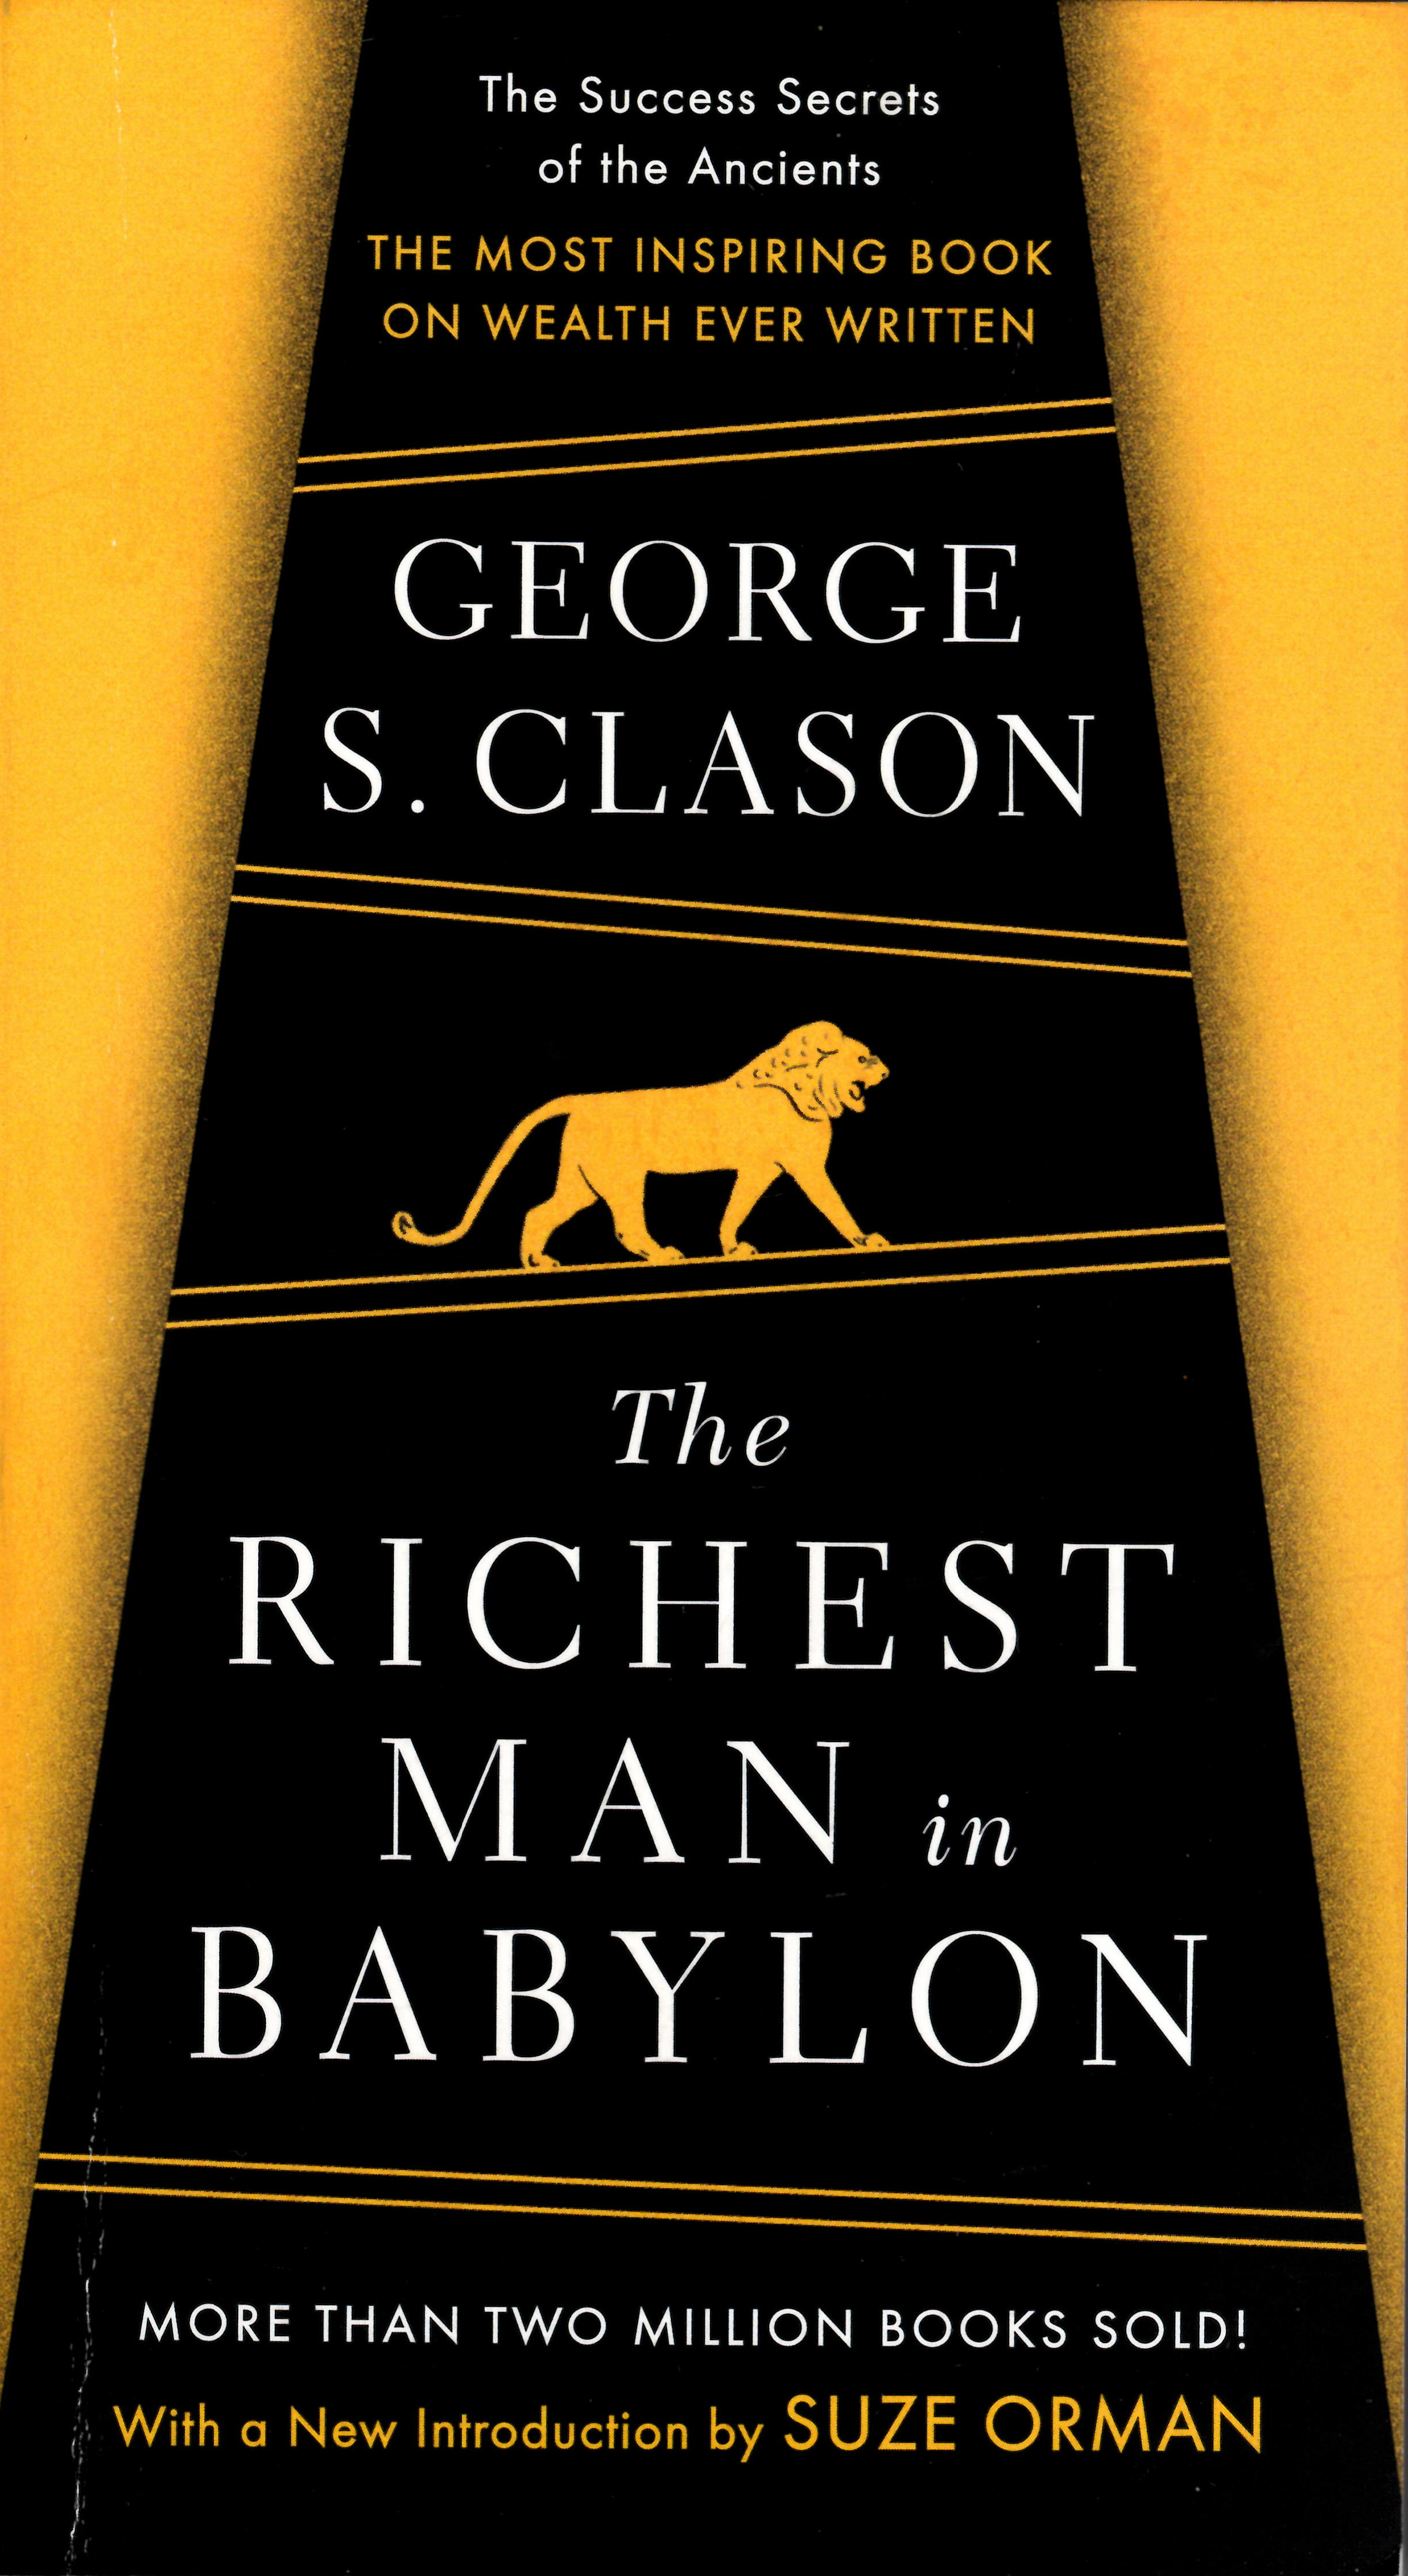 Wisdom From The Heart of Iraq: 'The Richest Man In Babylon'